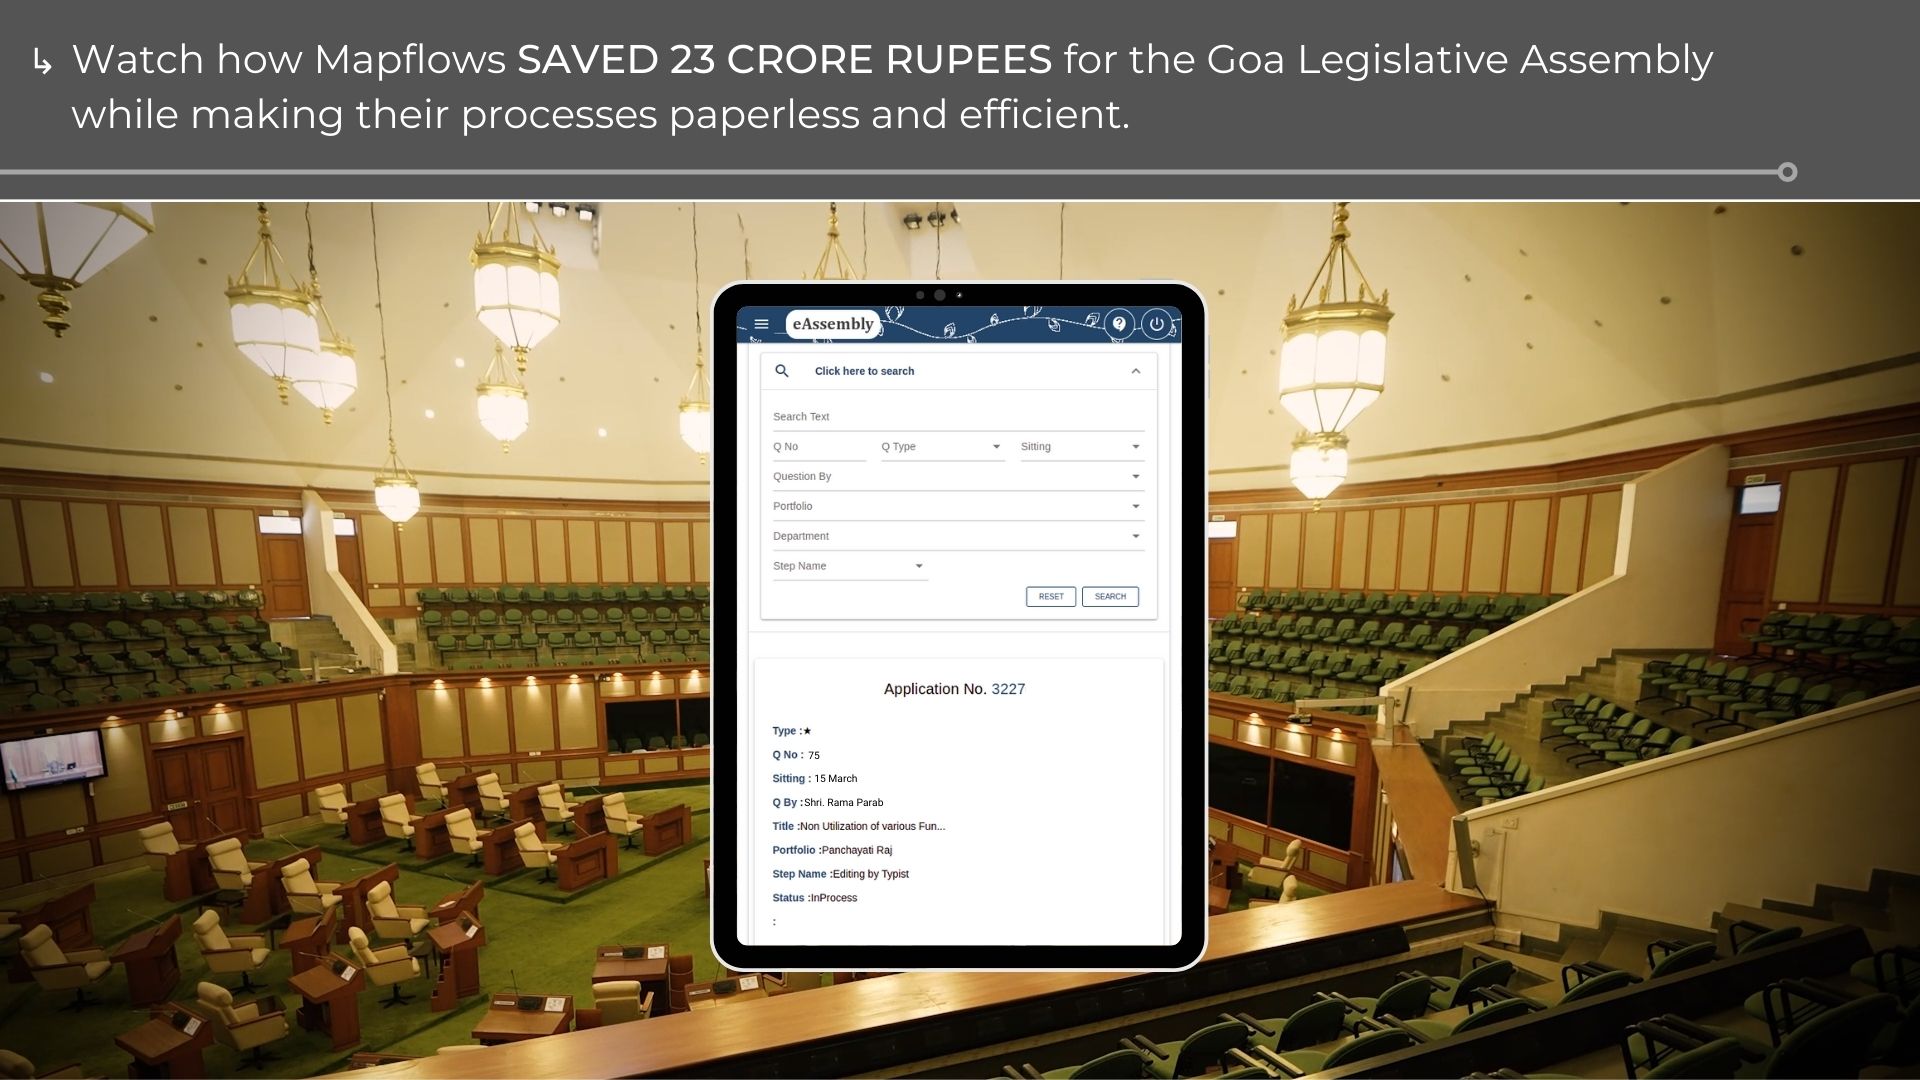 Goa Legislative Assembly SAVED 22 CRORE RUPEES by switching to our Paperless Governance System eAssembly.